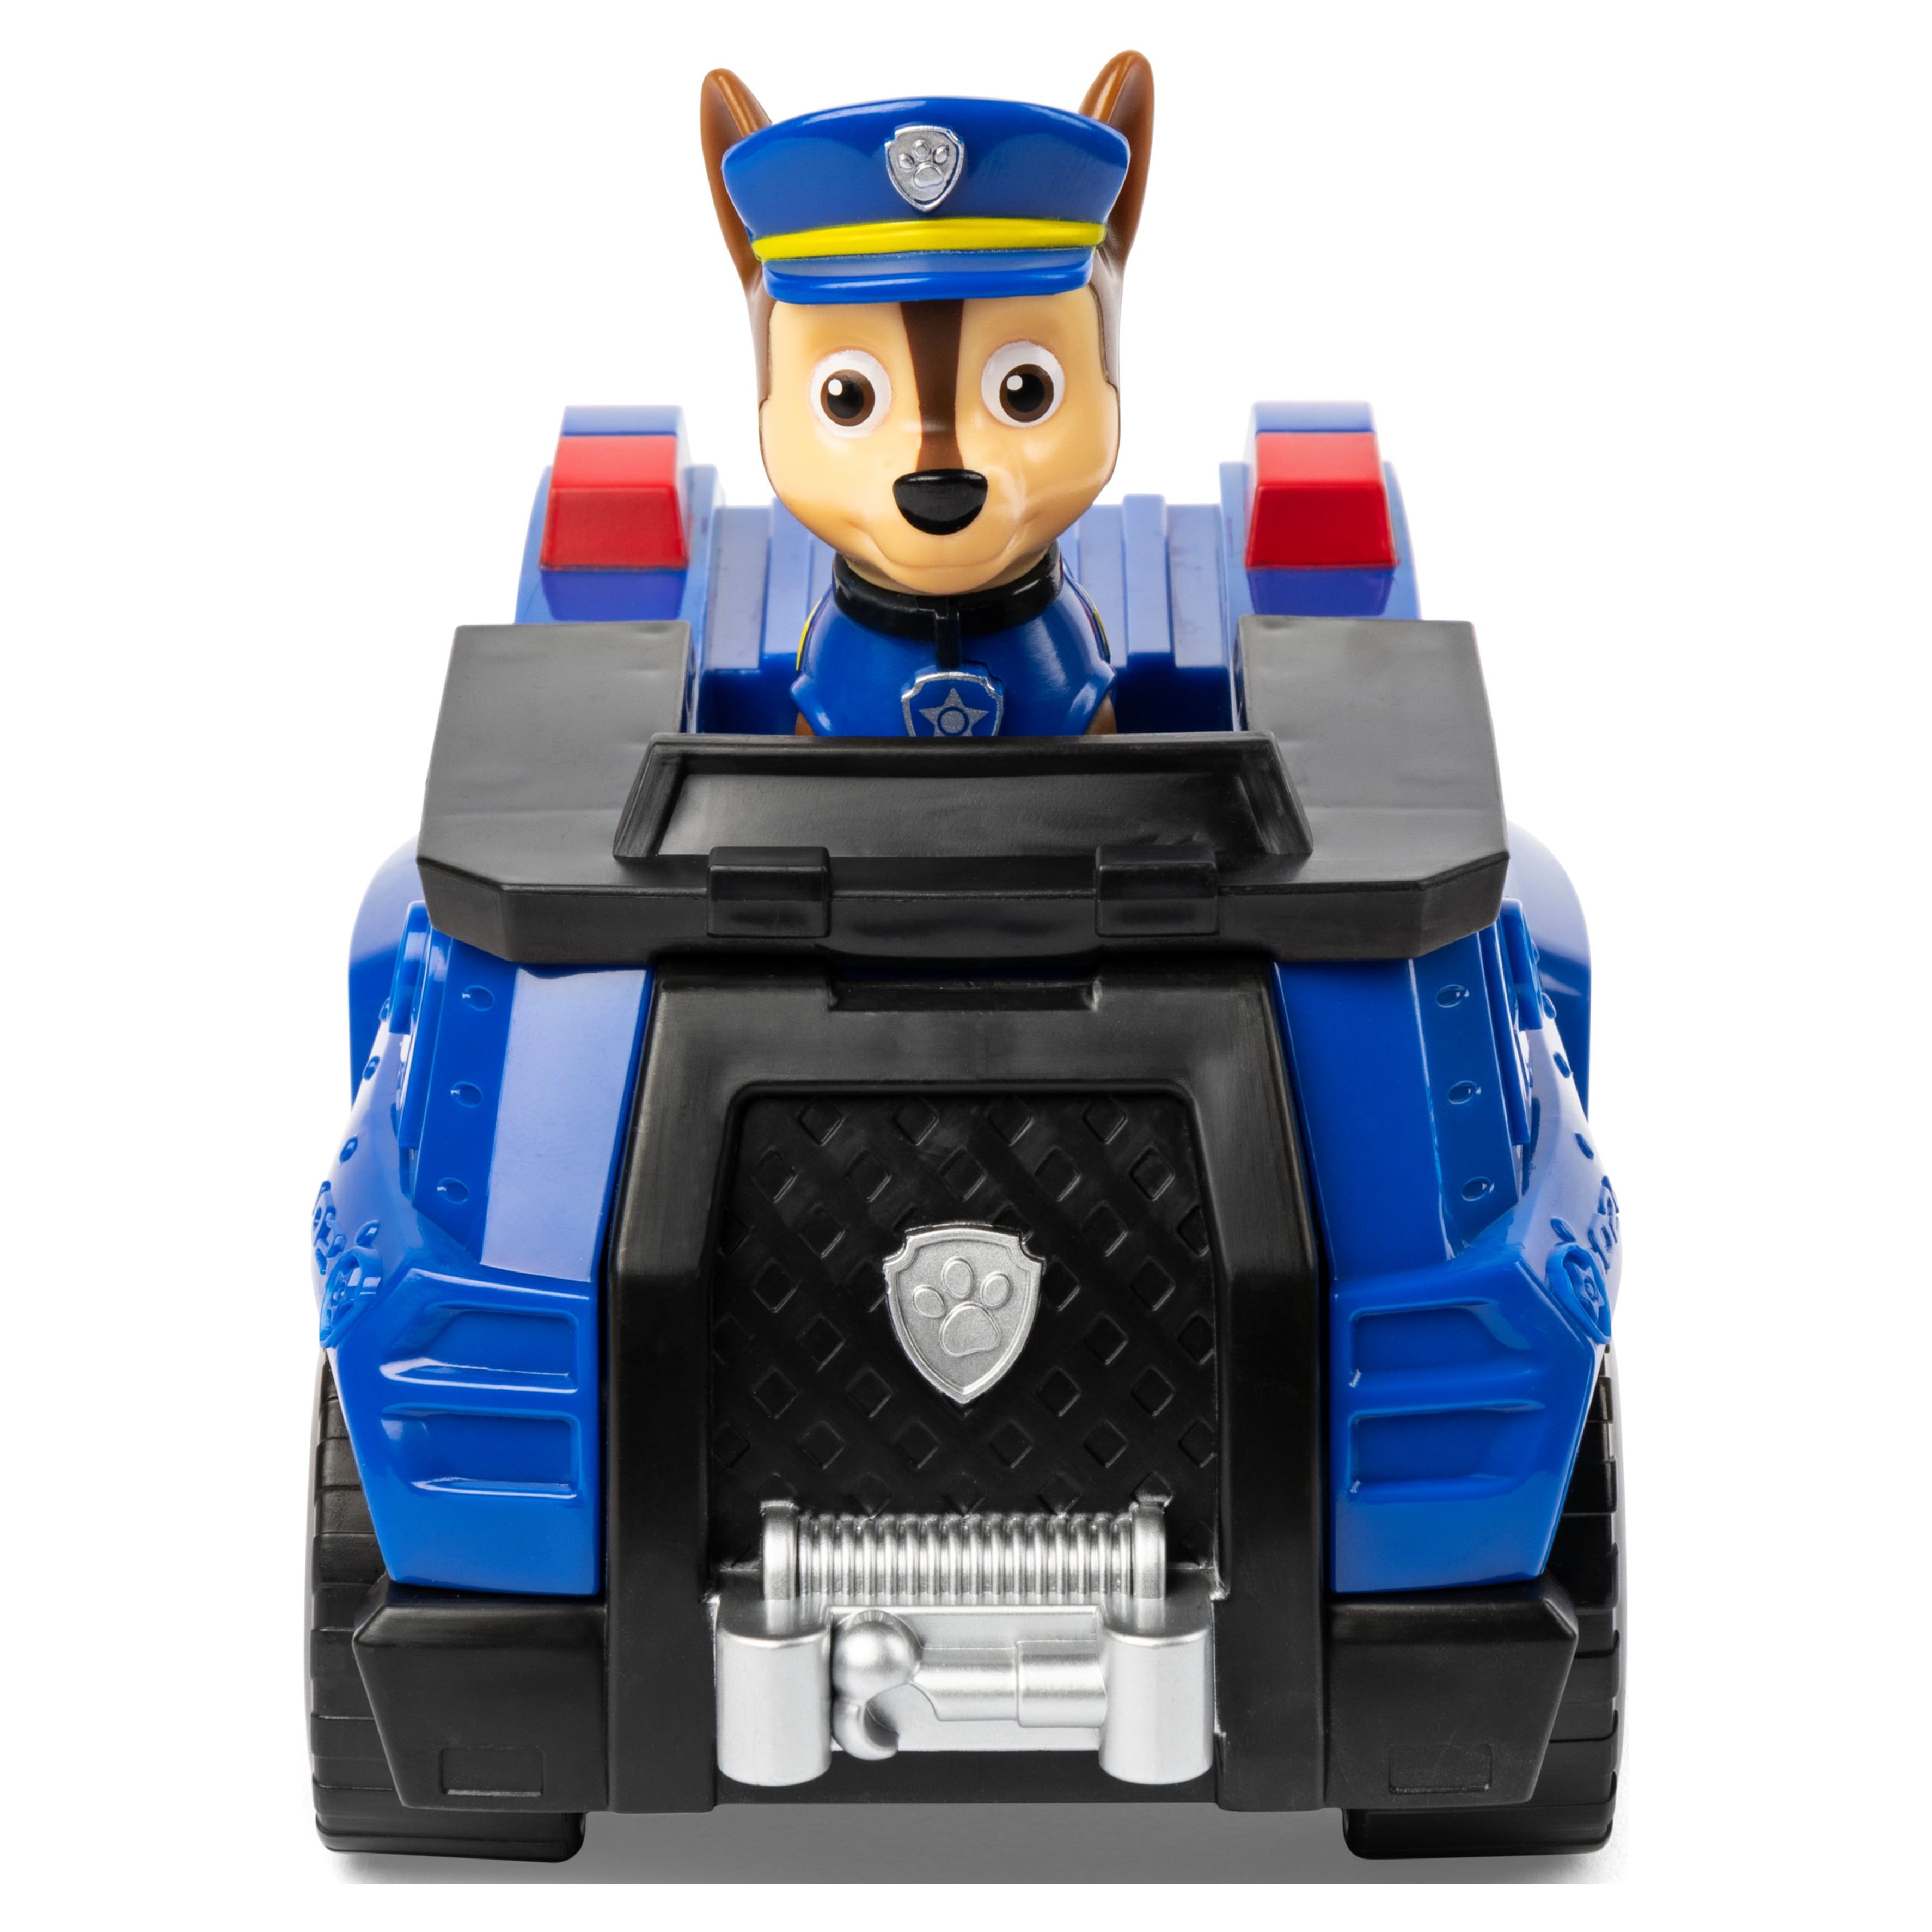 PAW Patrol, Chase’s Patrol Cruiser Vehicle with Collectible Figure - image 5 of 5